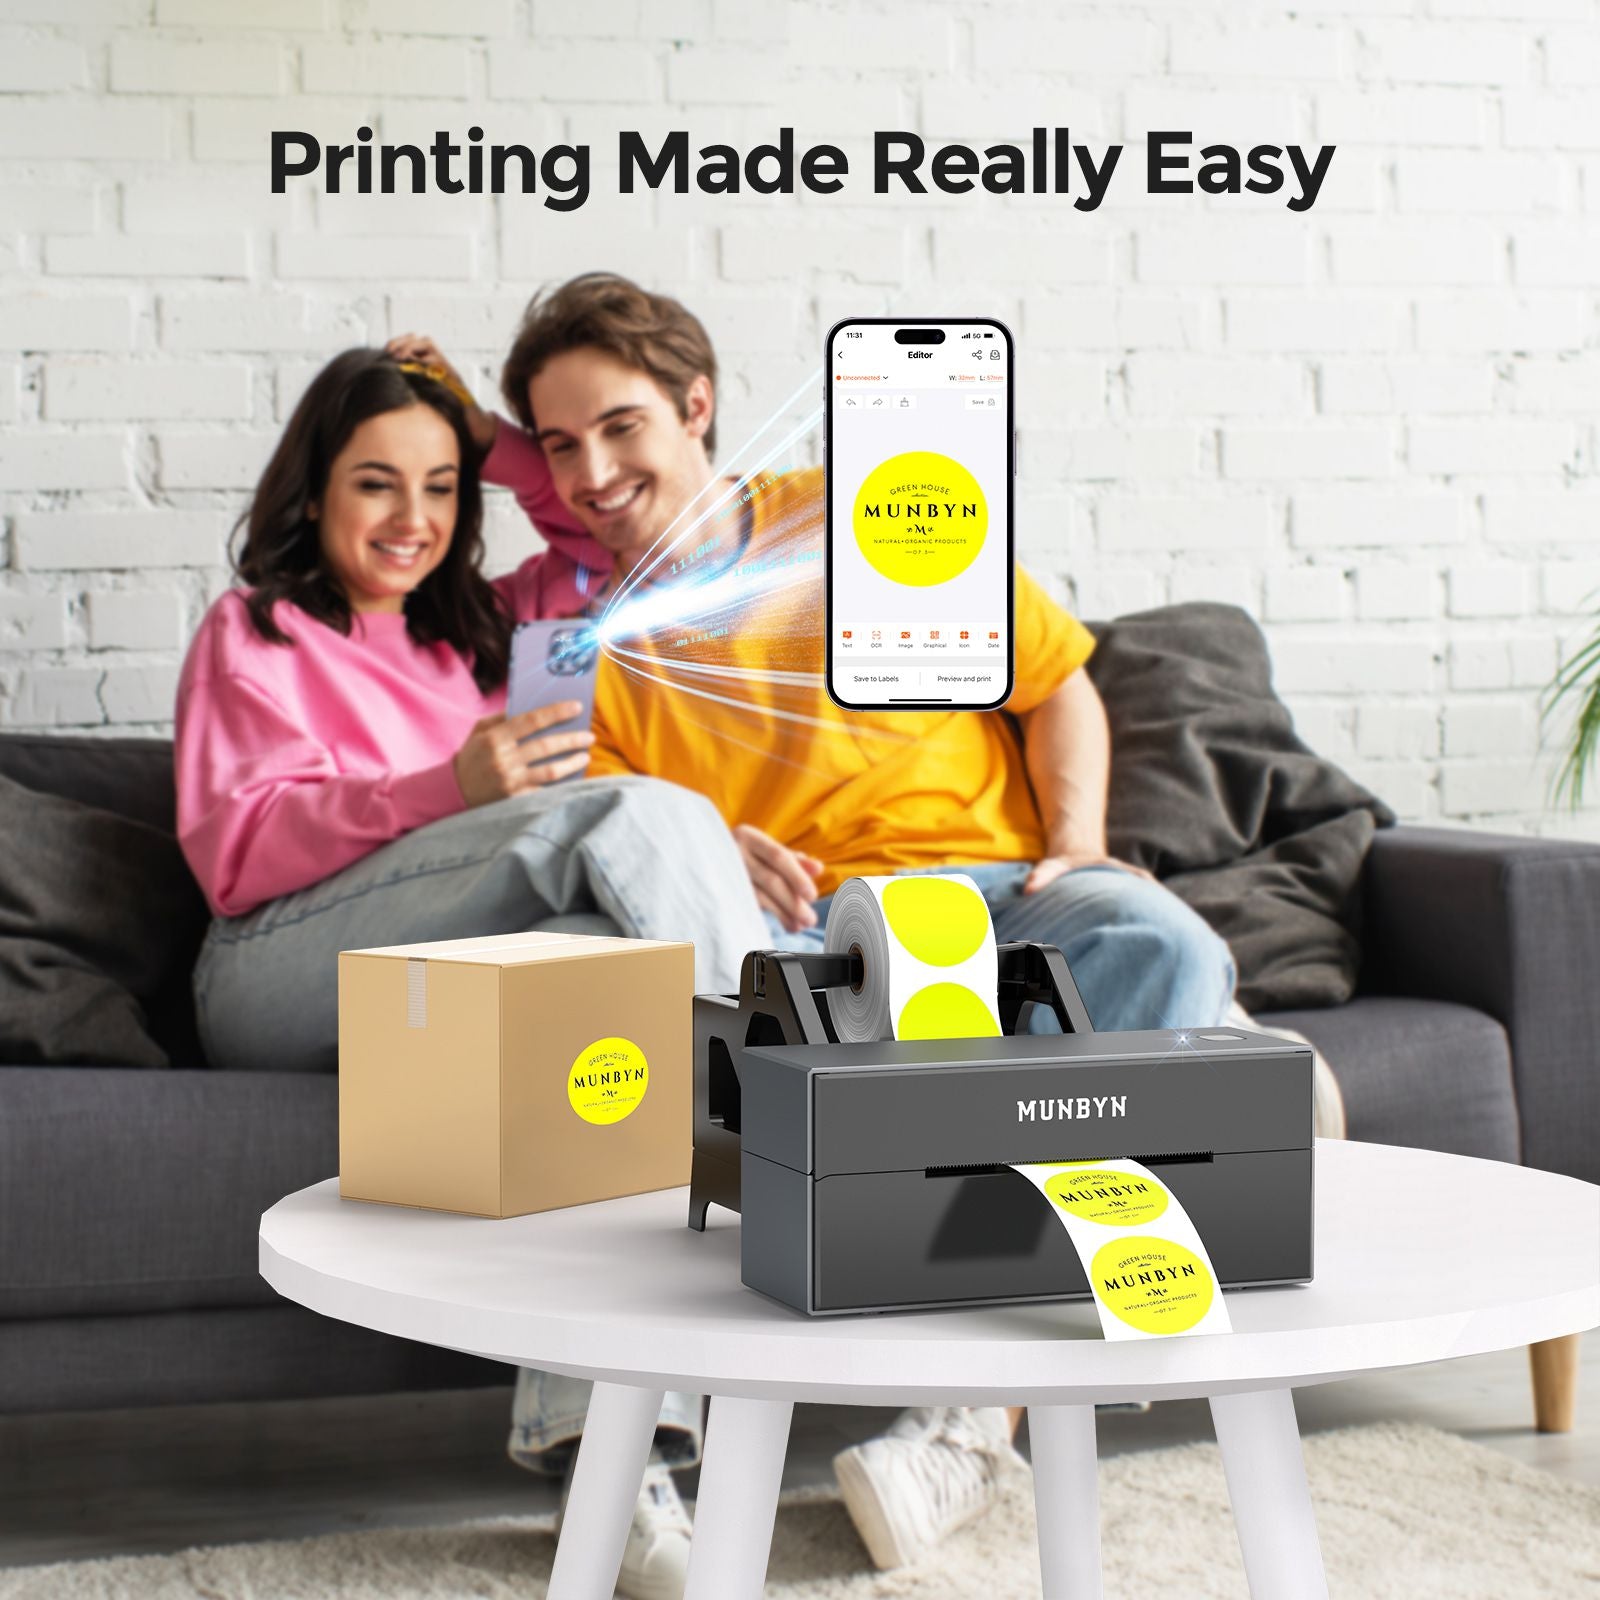 MUNBYN Bluetooth wireless shipping label printer can make printing and shipping easier.